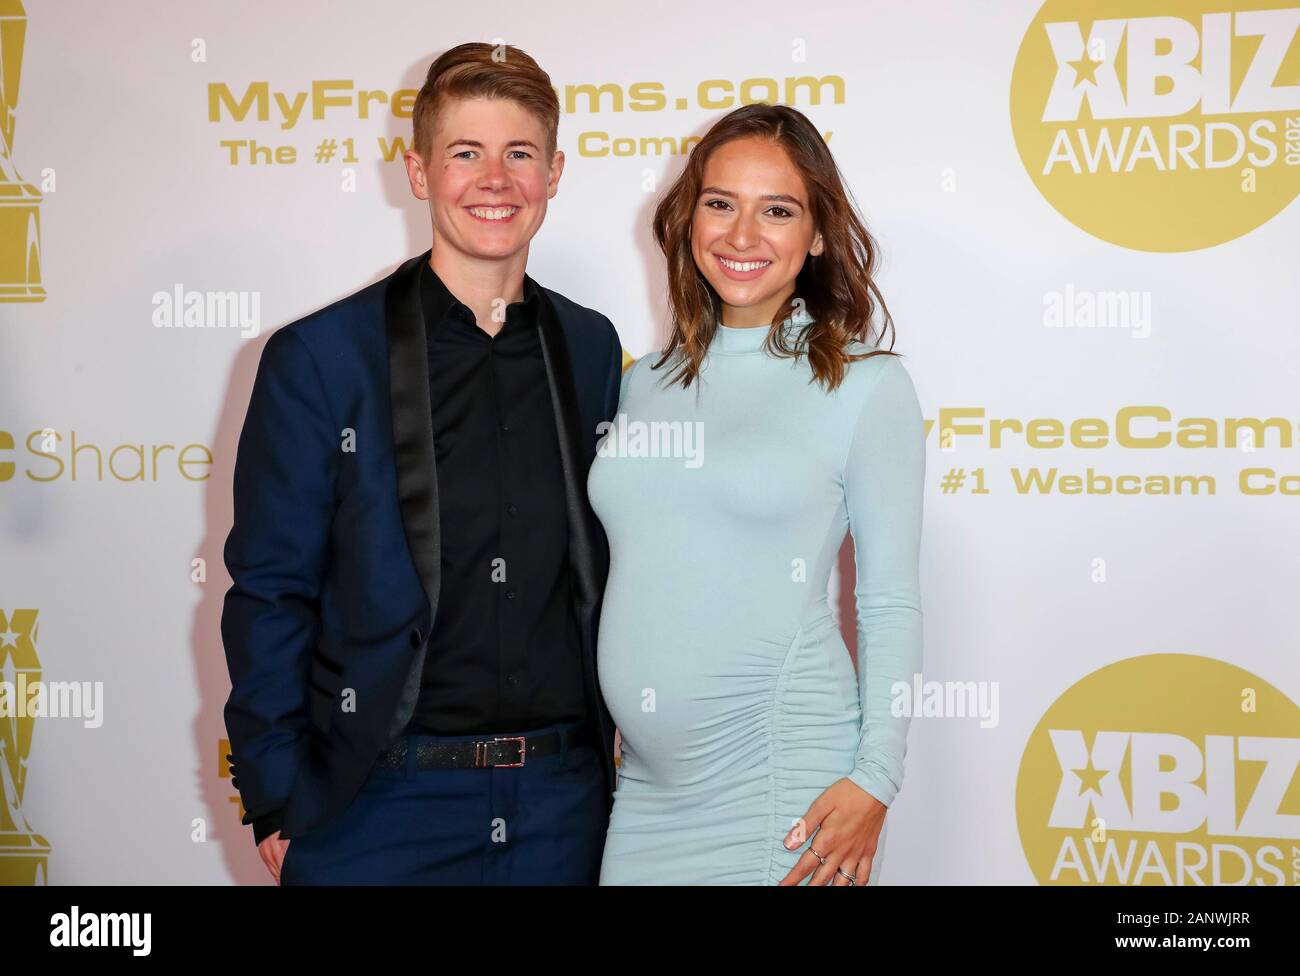 Bree Mills (l) and Shawna Mills attend the 2020 XBIZ Awards at Hotel Westin  Bonaventure in Los Angeles, USA, on 16 January 2020. | usage worldwide  Stock Photo - Alamy